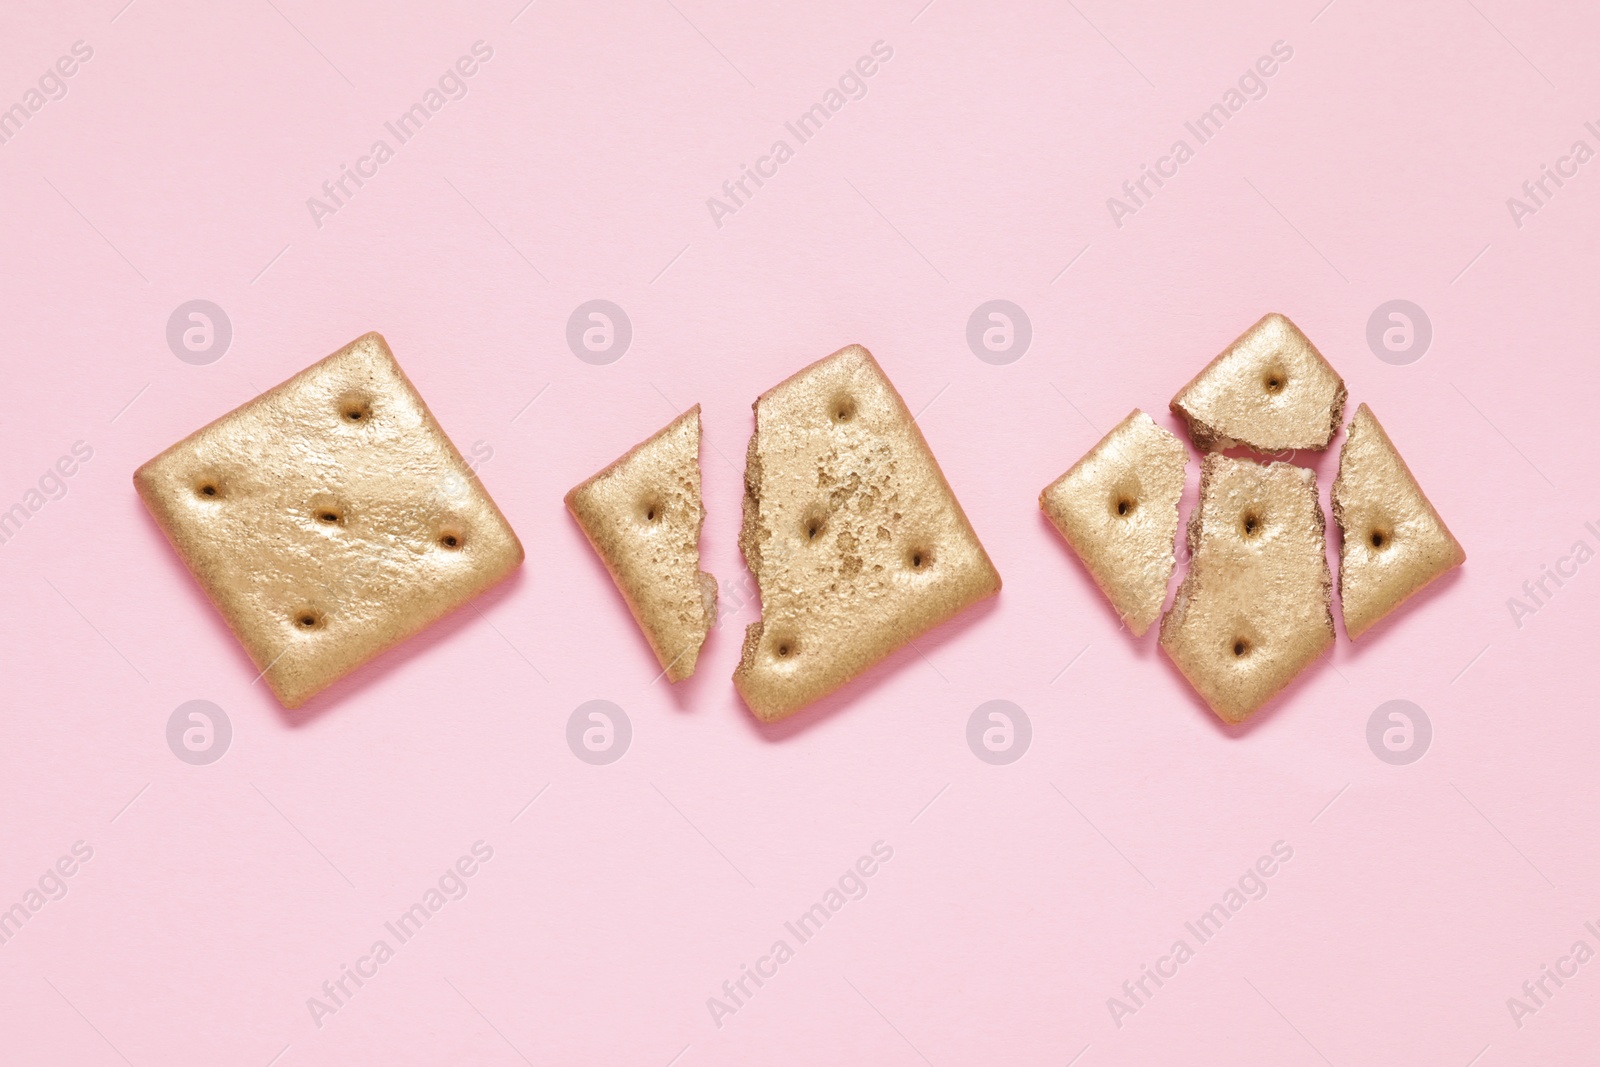 Photo of Golden whole and cracked cookies on light pink background, flat lay